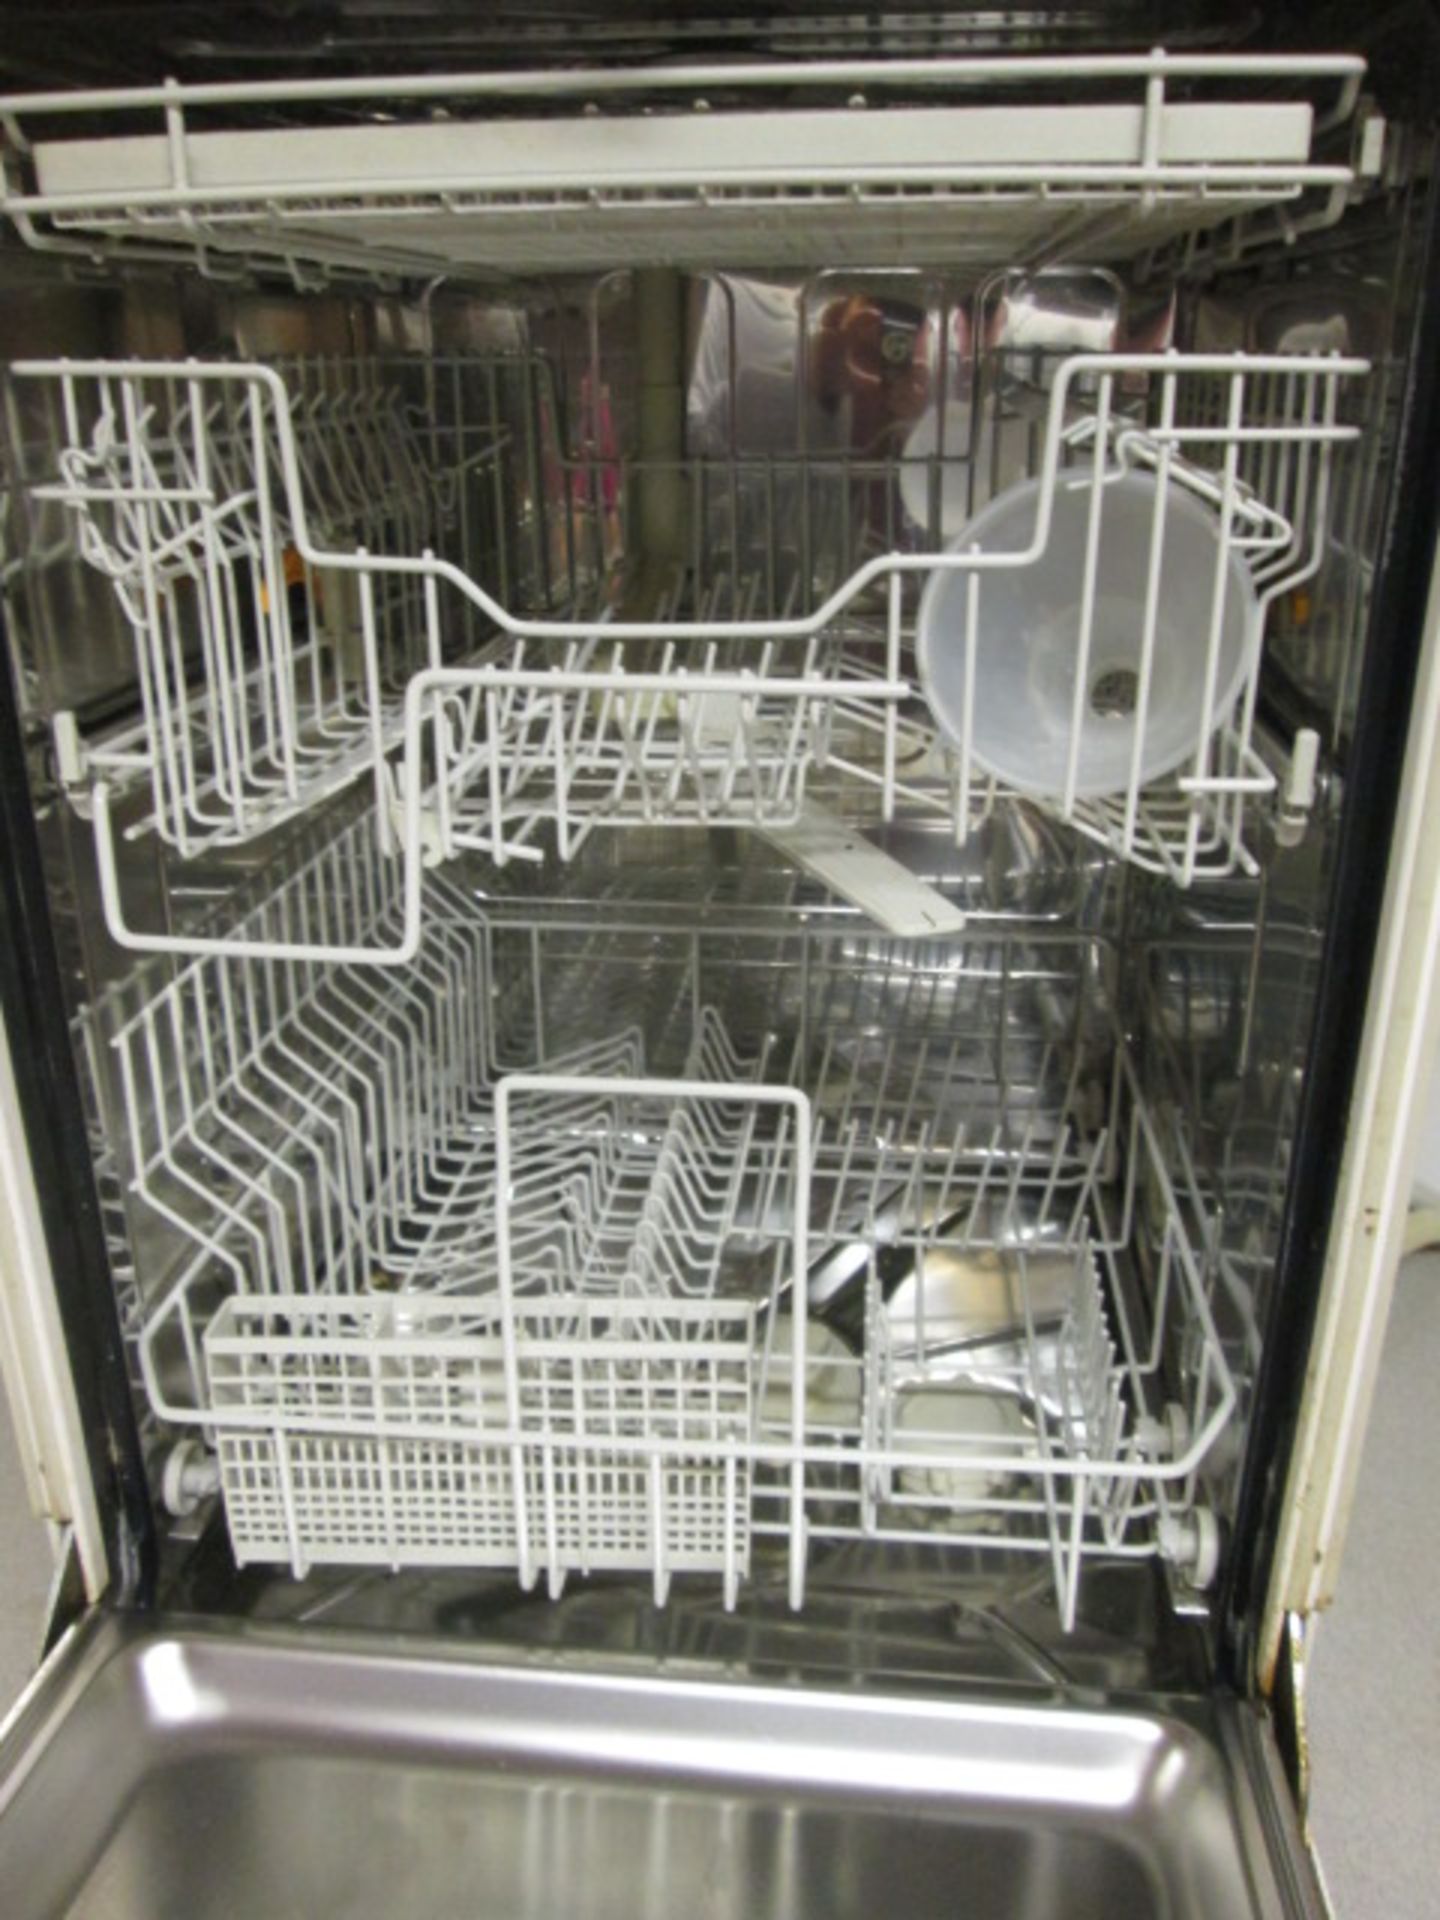 Miele Classic Turbothermic Dishwasher, Model G349SCHE PLUS. (Ex Demonstrator, Used). With - Image 4 of 5